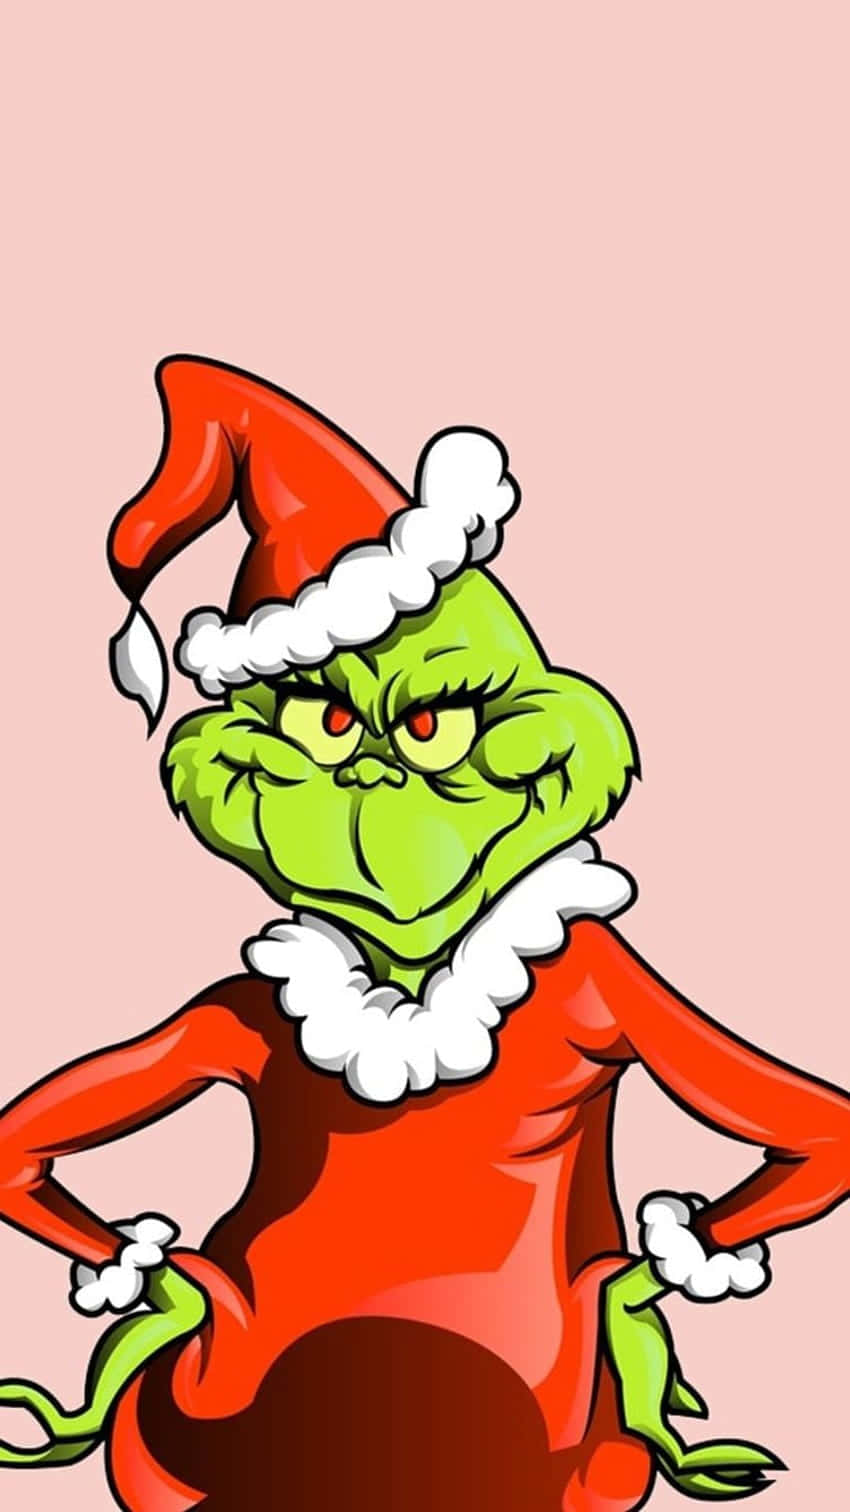 Celebrate the Holidays Like the Grinch!